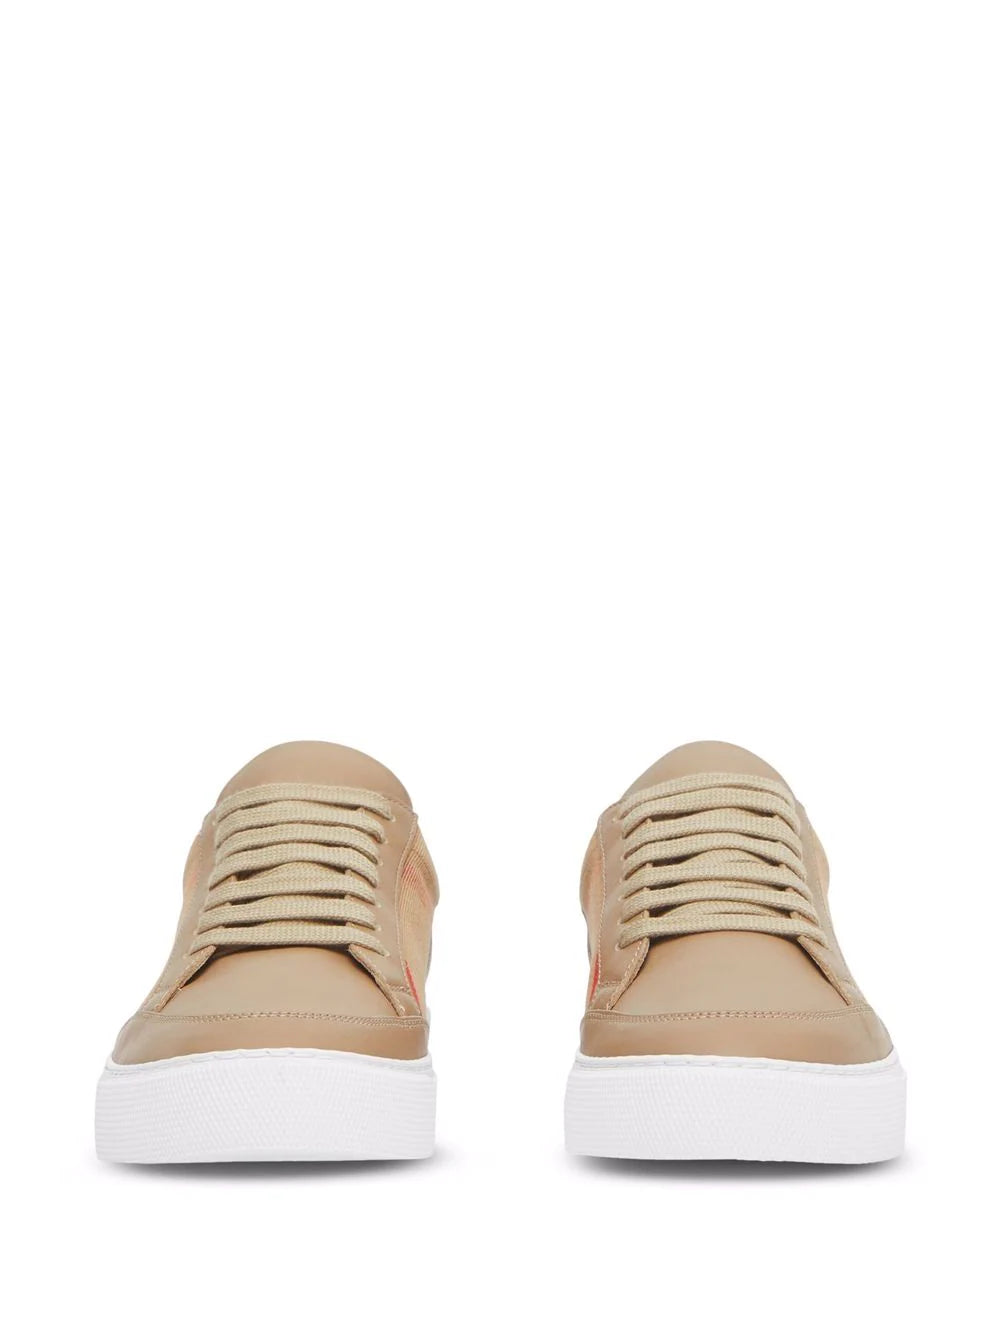 Burberry Beige House Check Sneakers